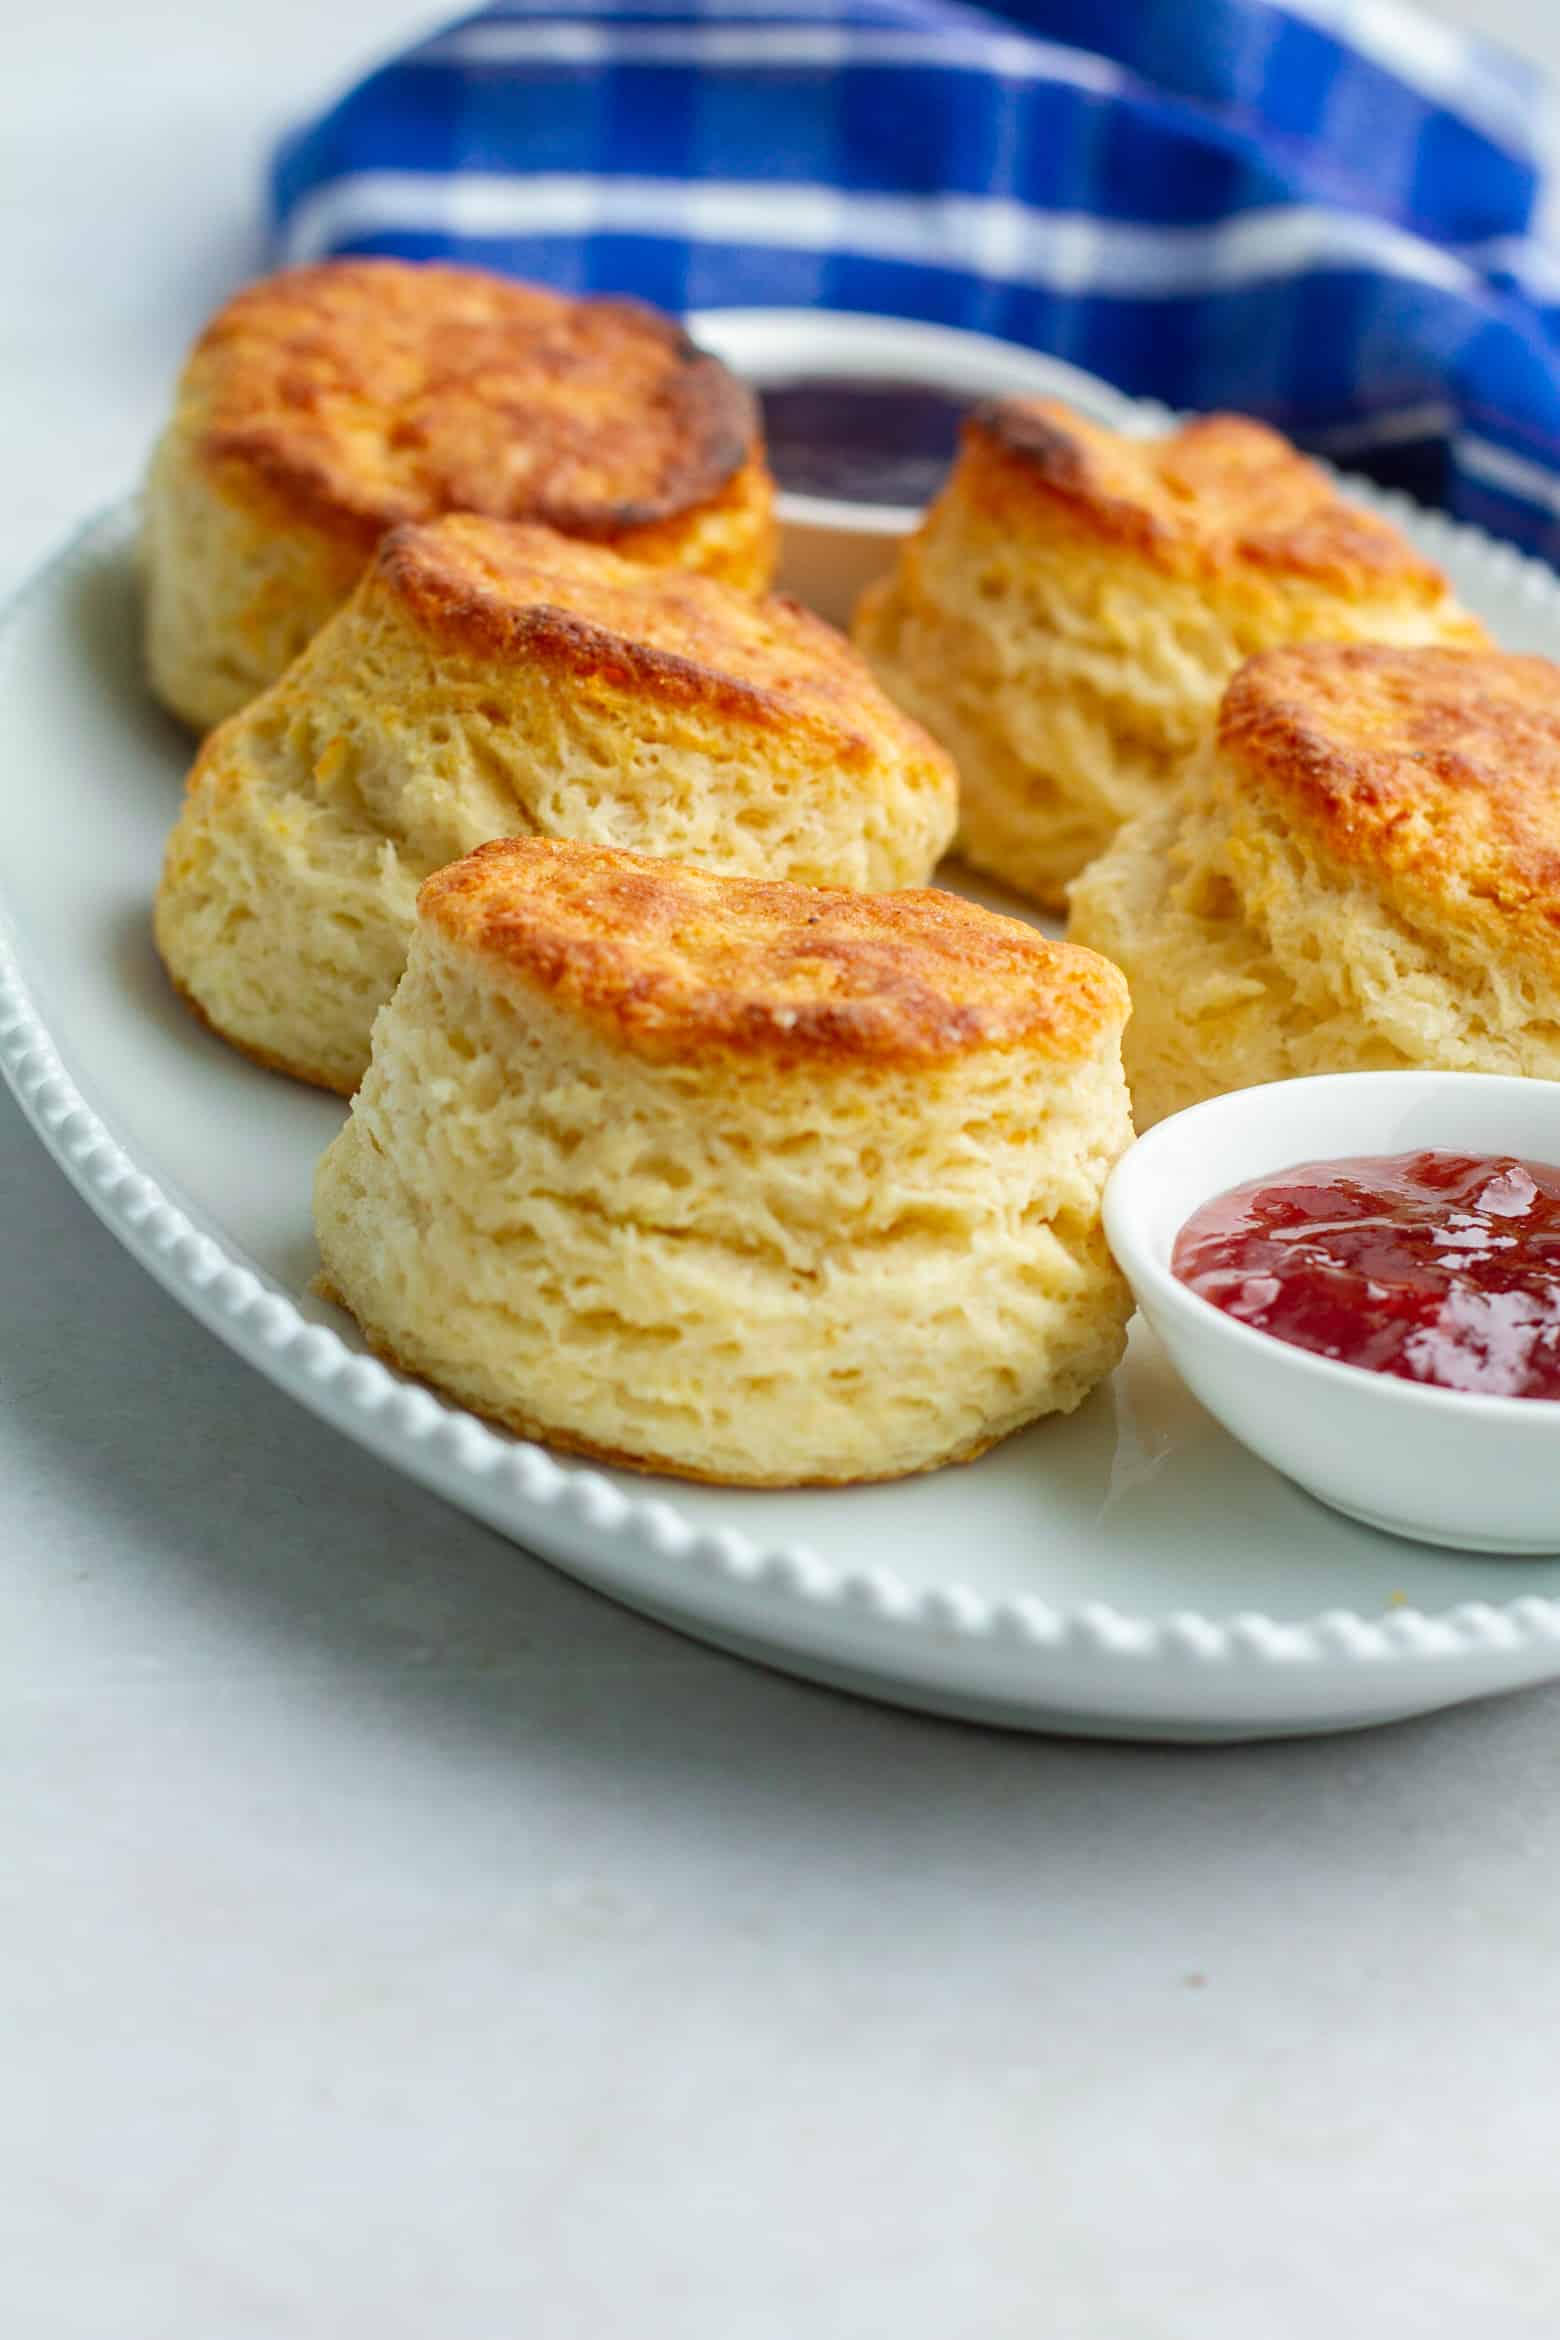 Flaky biscuits on a platter with jam.